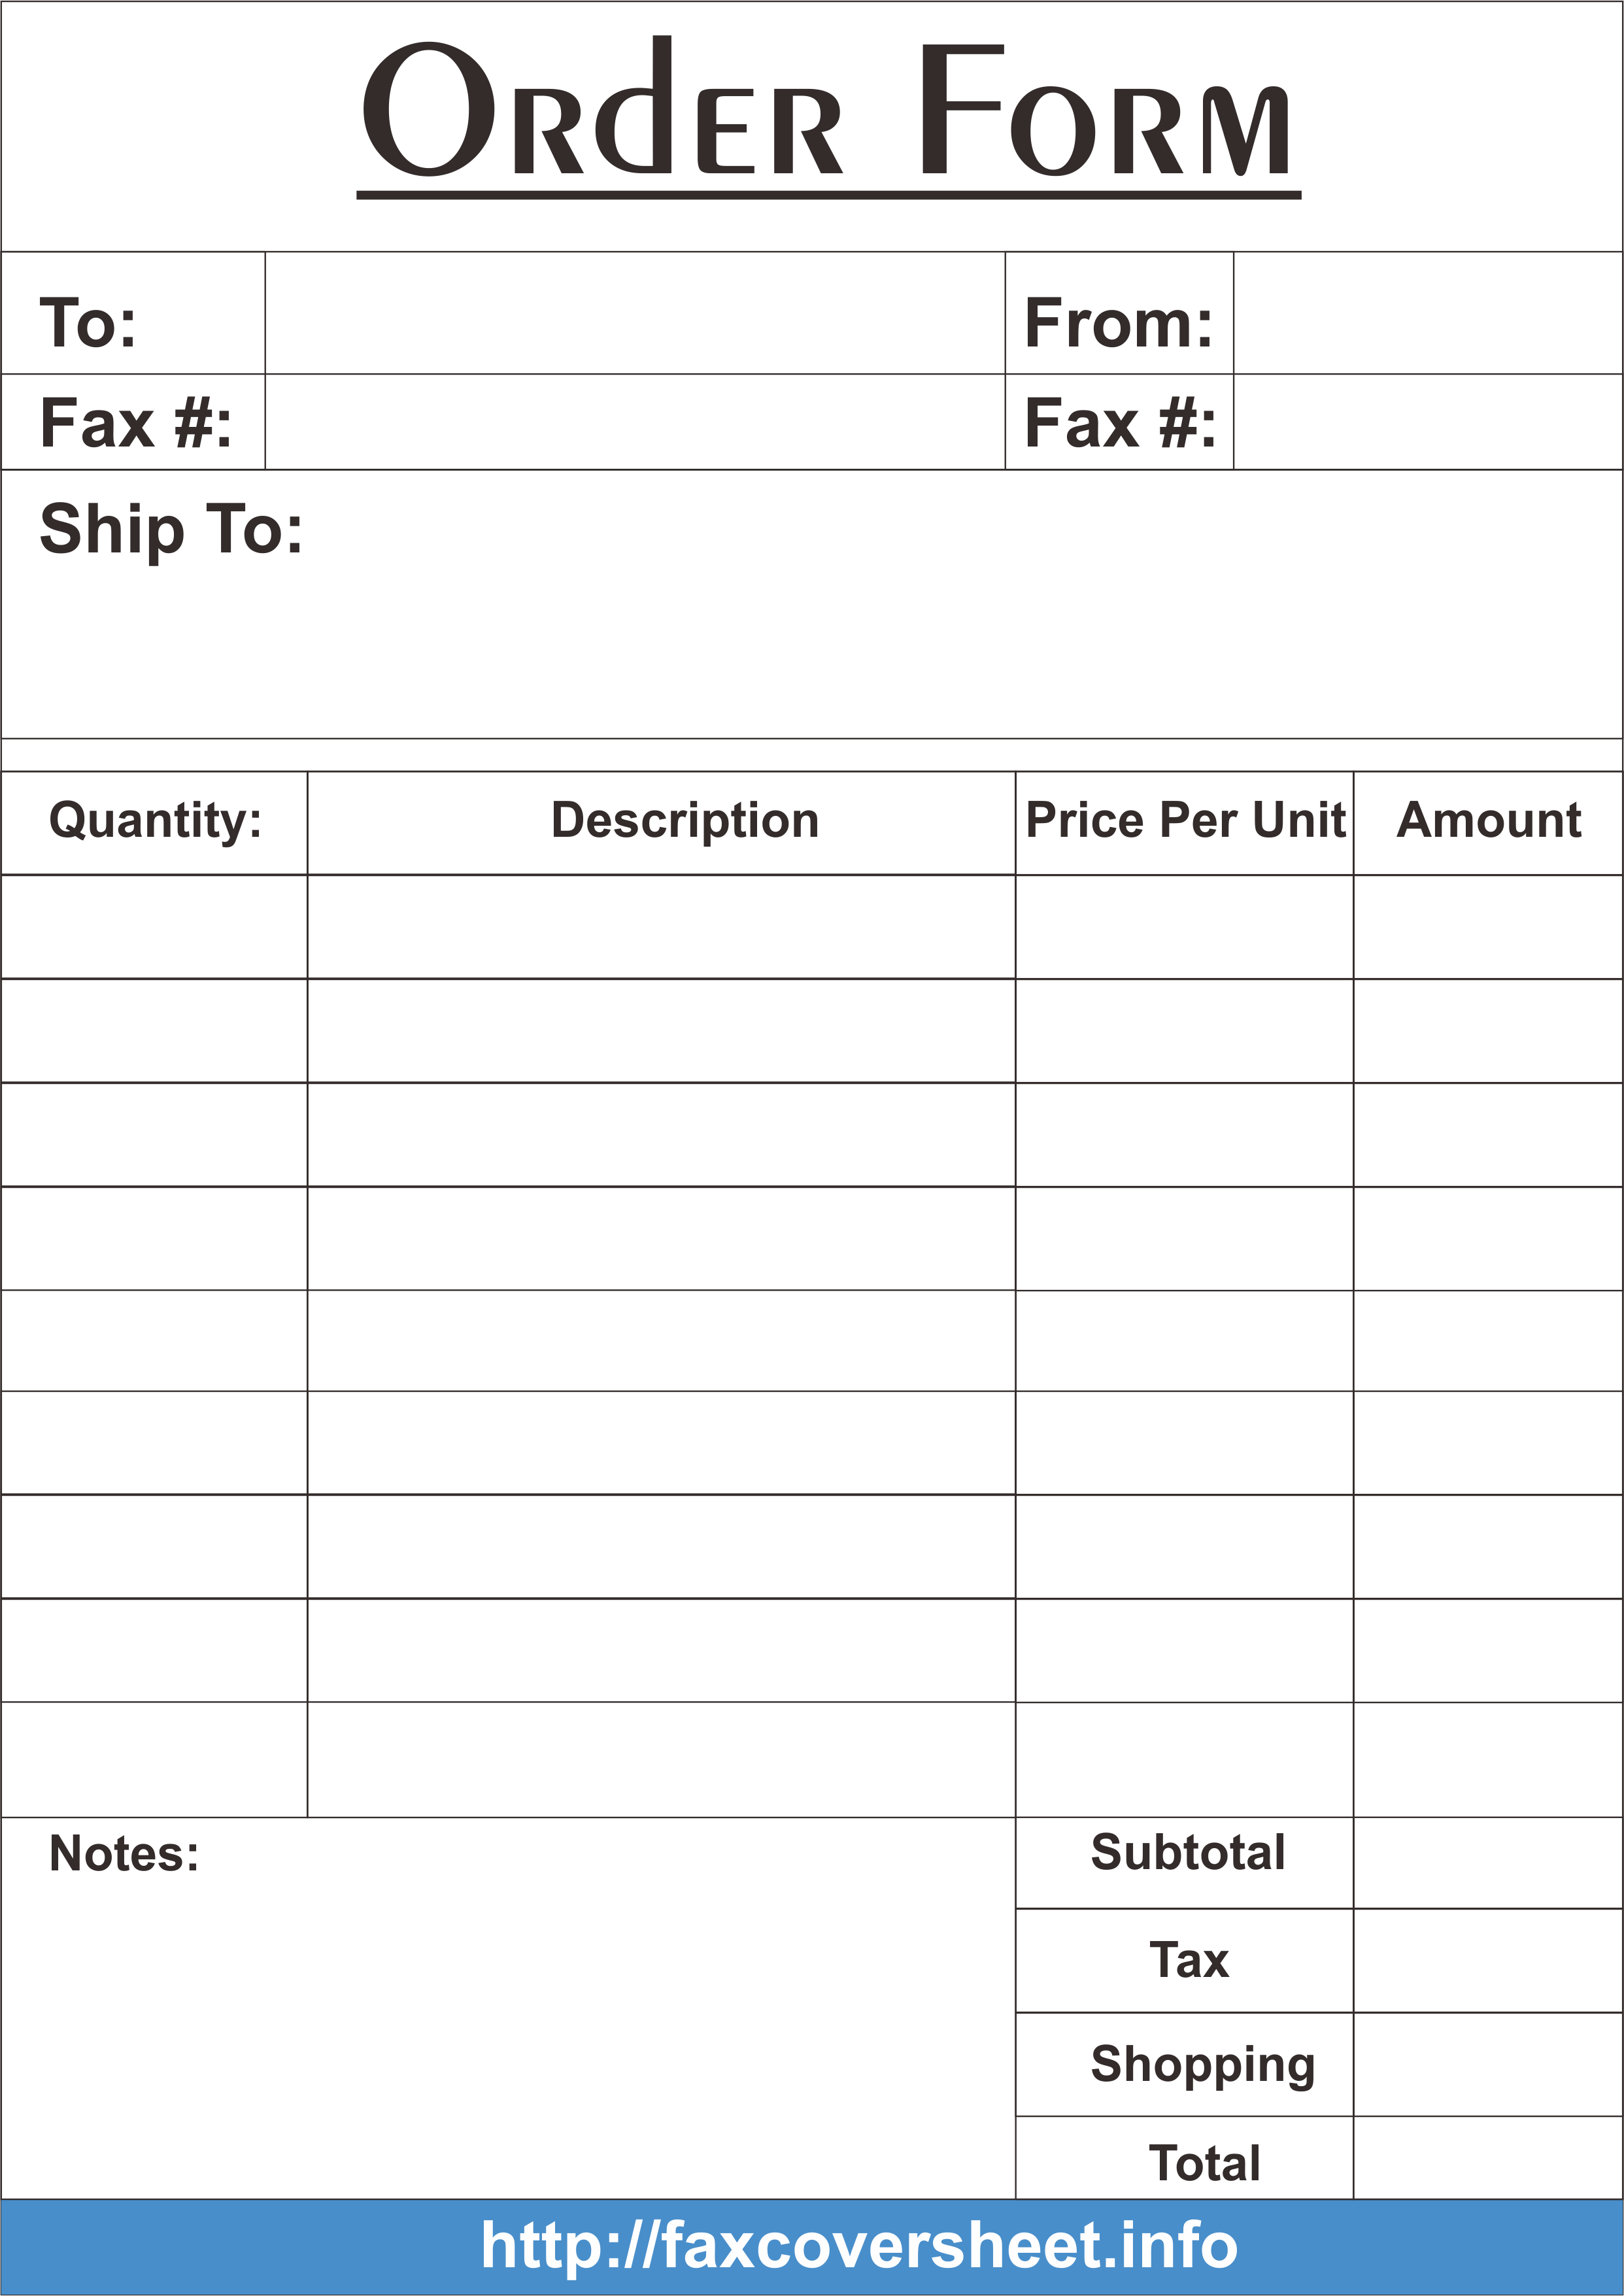 Pdf Order Form Template Free